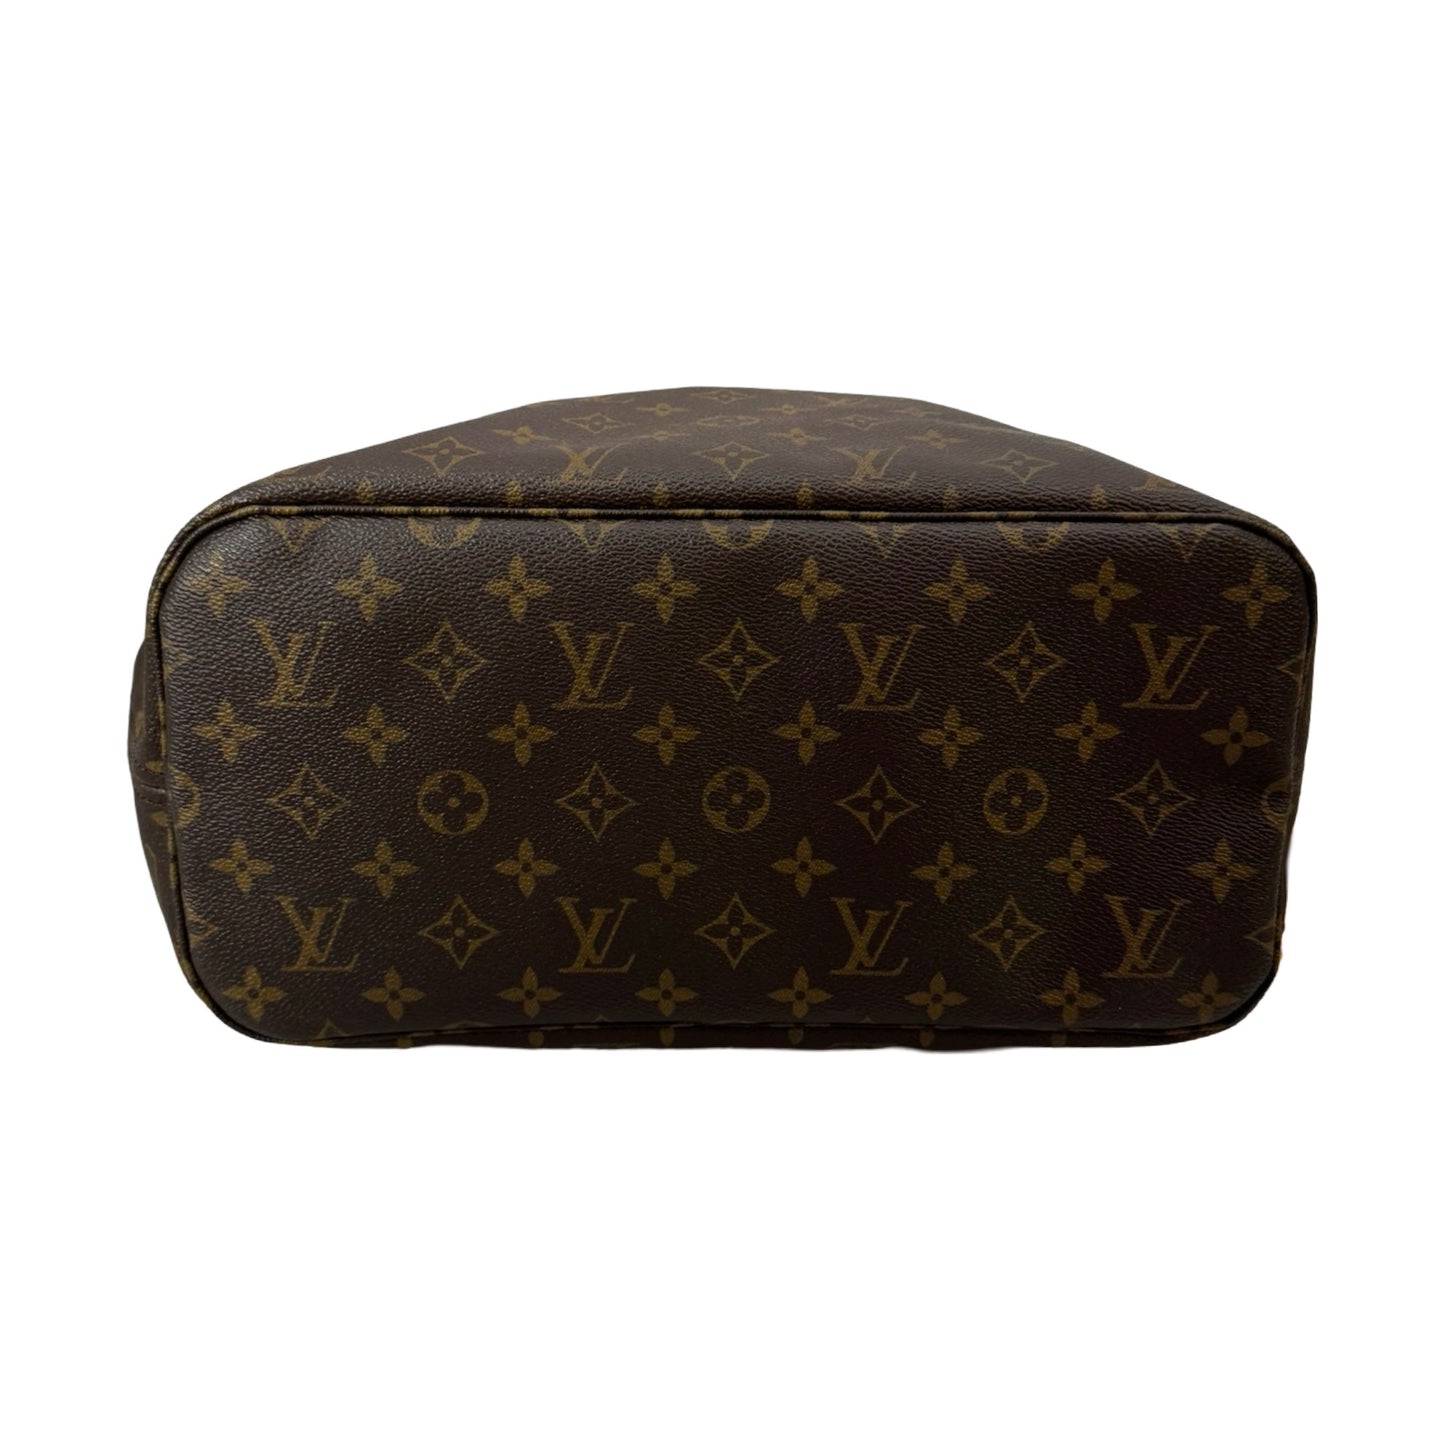 Neverfull Coated Canvas Monogram Brown Dual Vachetta Leather Handles with Gold-Tone Hardware Tote Luxury Designer By Louis Vuitton  Size: Medium